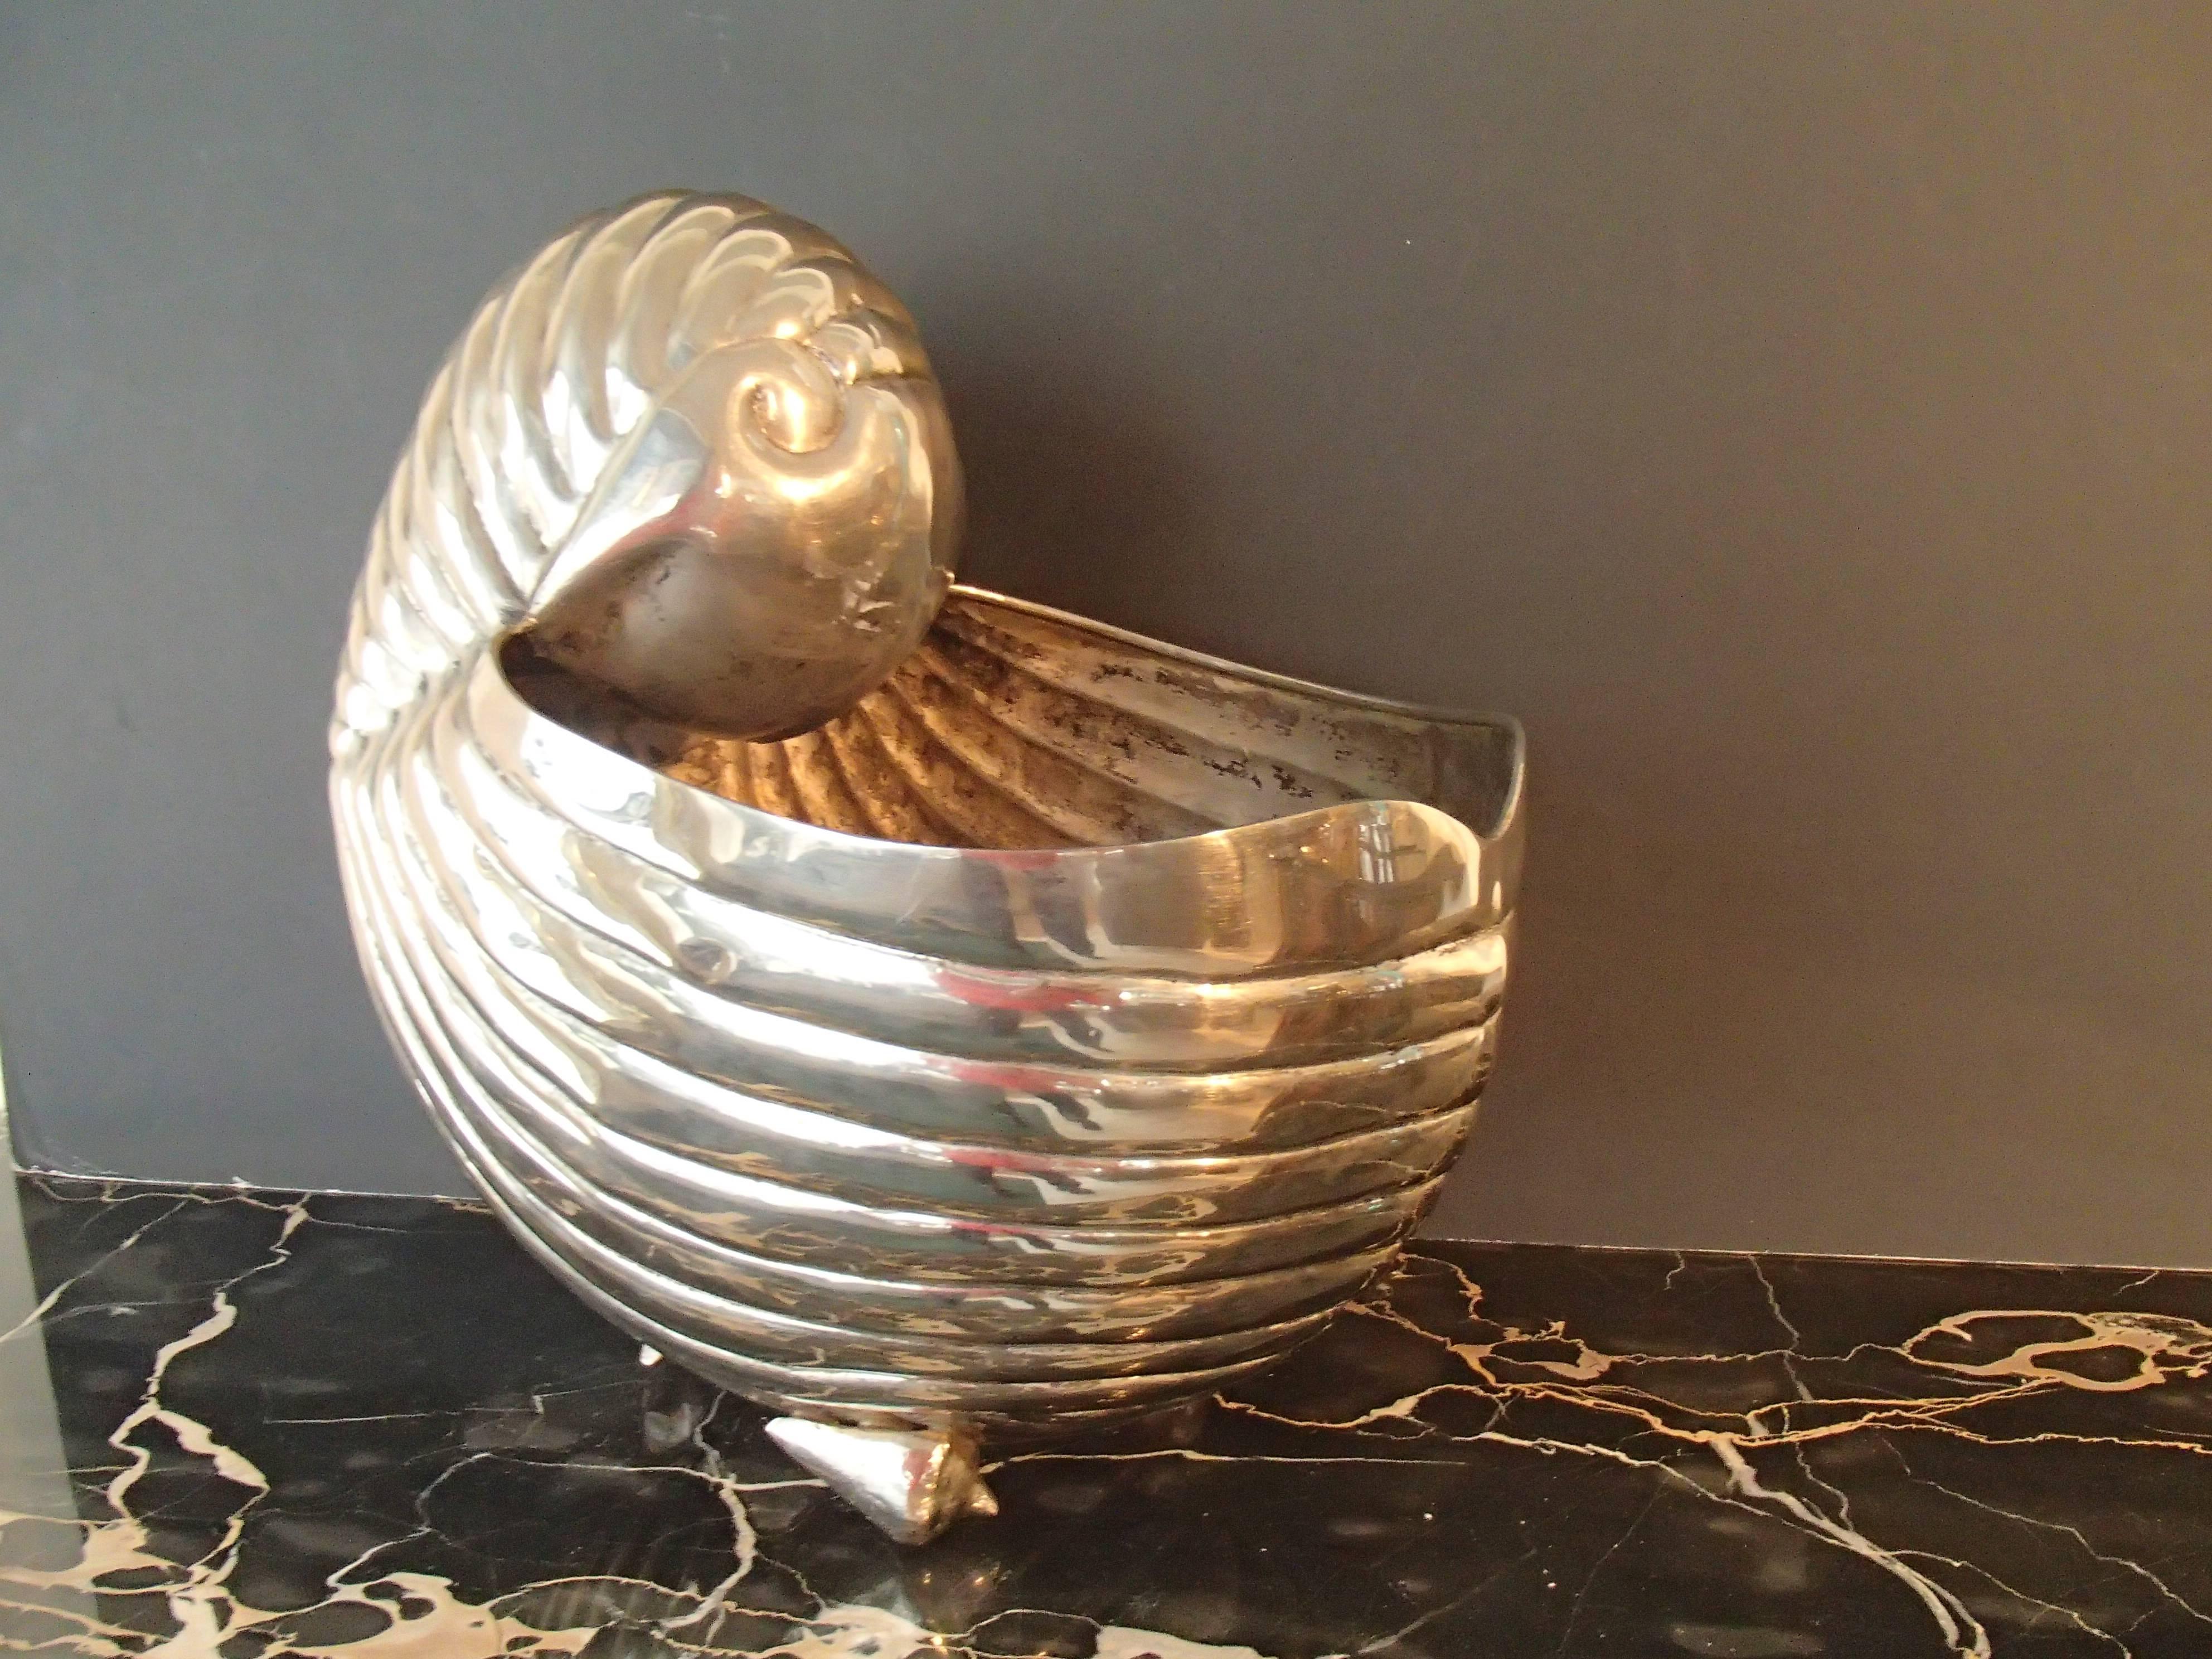 Metalwork Modern Champagne or Vine Cooler like a Shell Seen in 